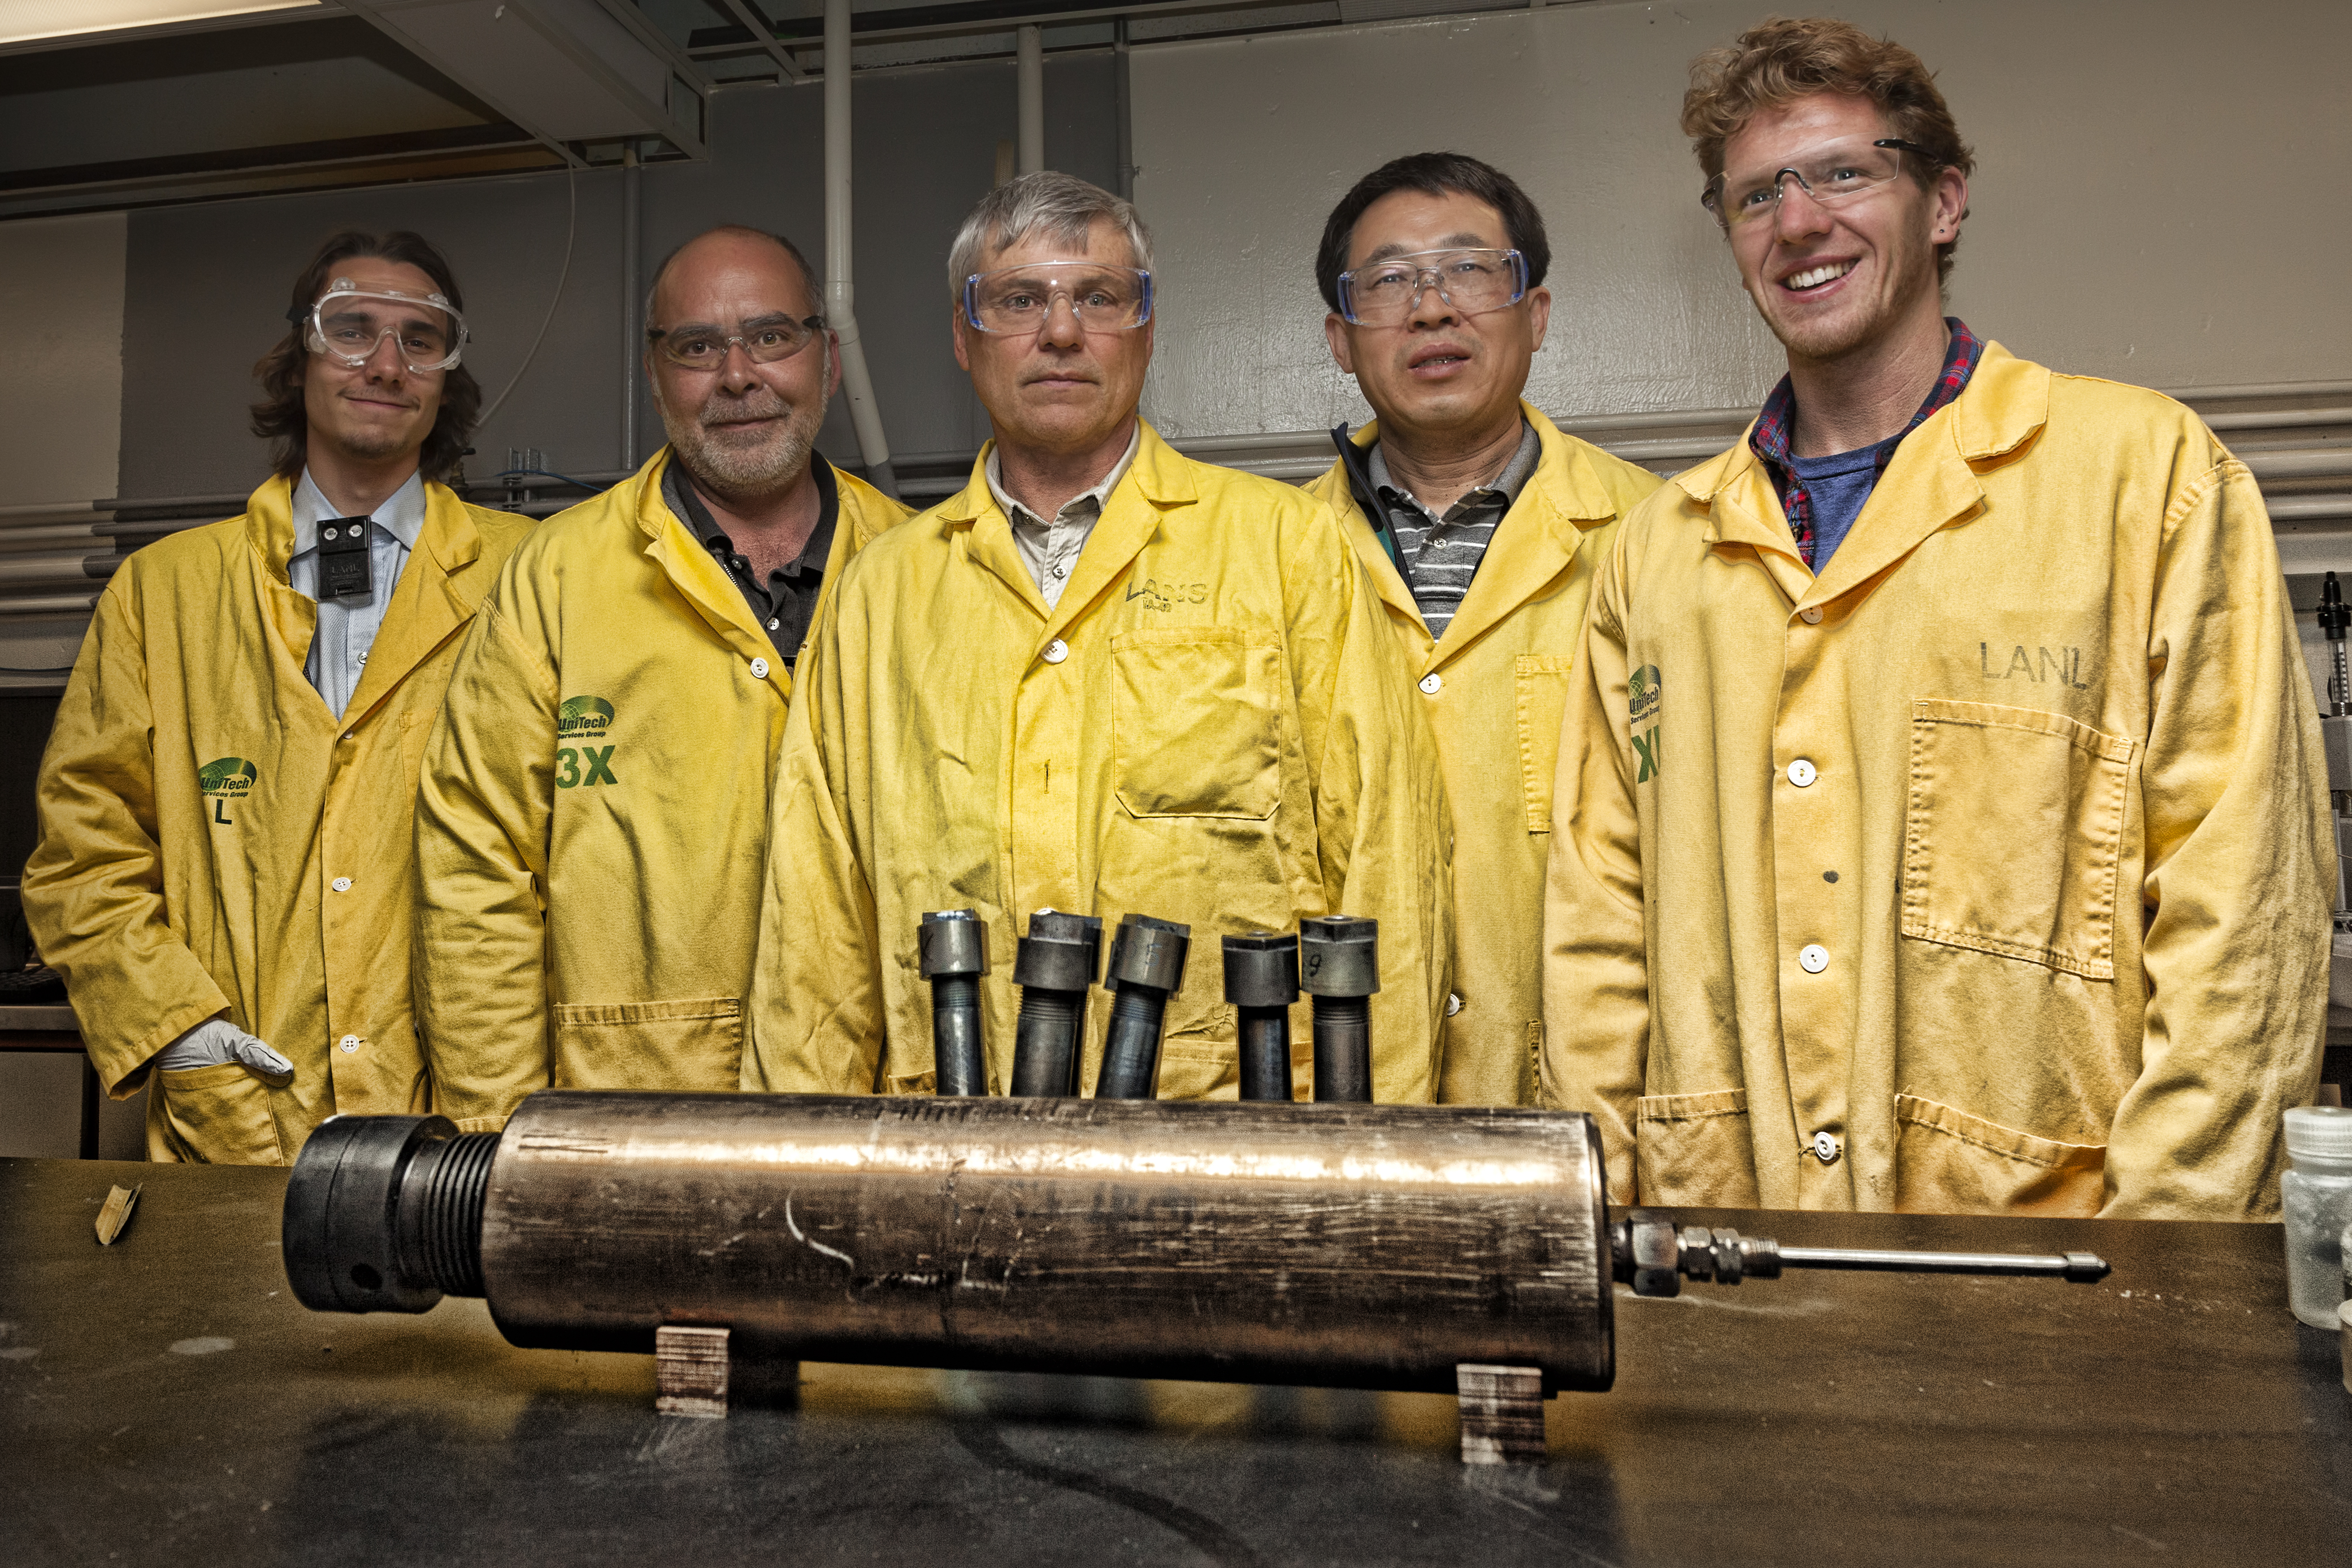 The Radionuclide Geochemistry Team uses different autoclave systems to study the solubility and speciation of uranium and thorium at elevated temperatures and pressures that are present in nuclear reactors and some environmental settings in order to better understand ore forming processes and to support safer nuclear power and nuclear waste disposal.